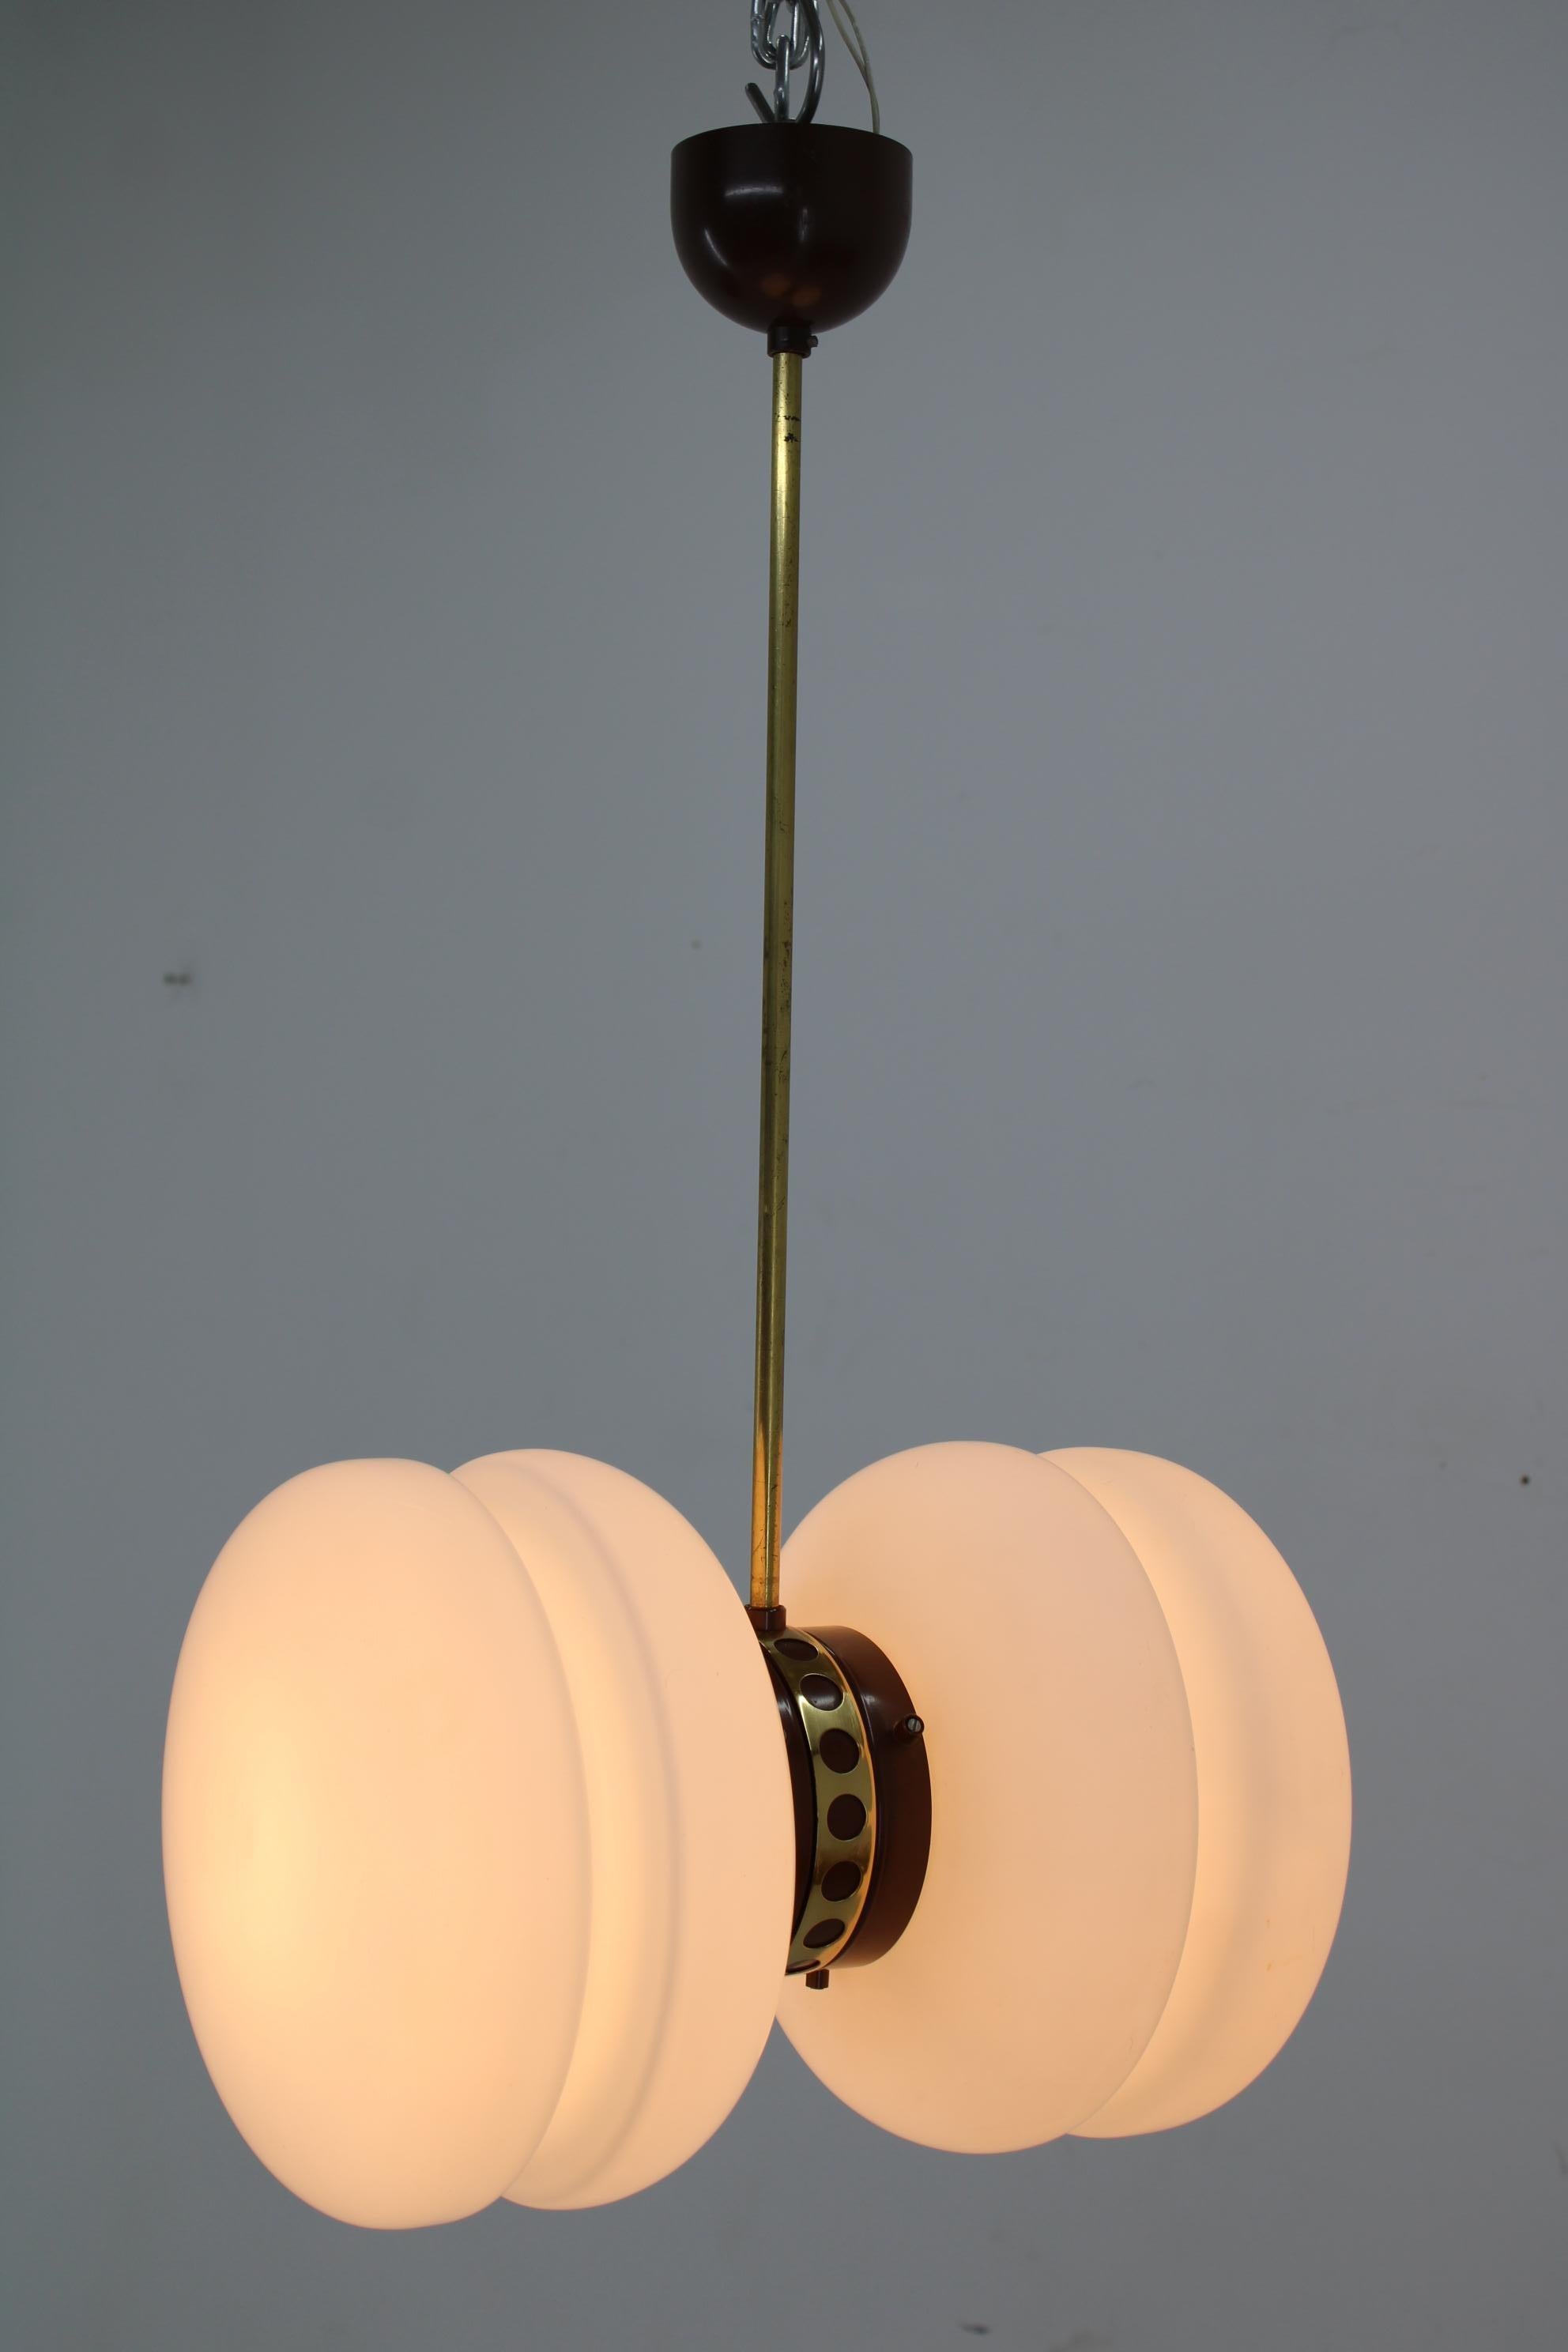 Space Age chandelier made in Czechoslovakia in 1960s.
Very good original condition.
2x40W, E25-E27 bulbs
US wiring compatible